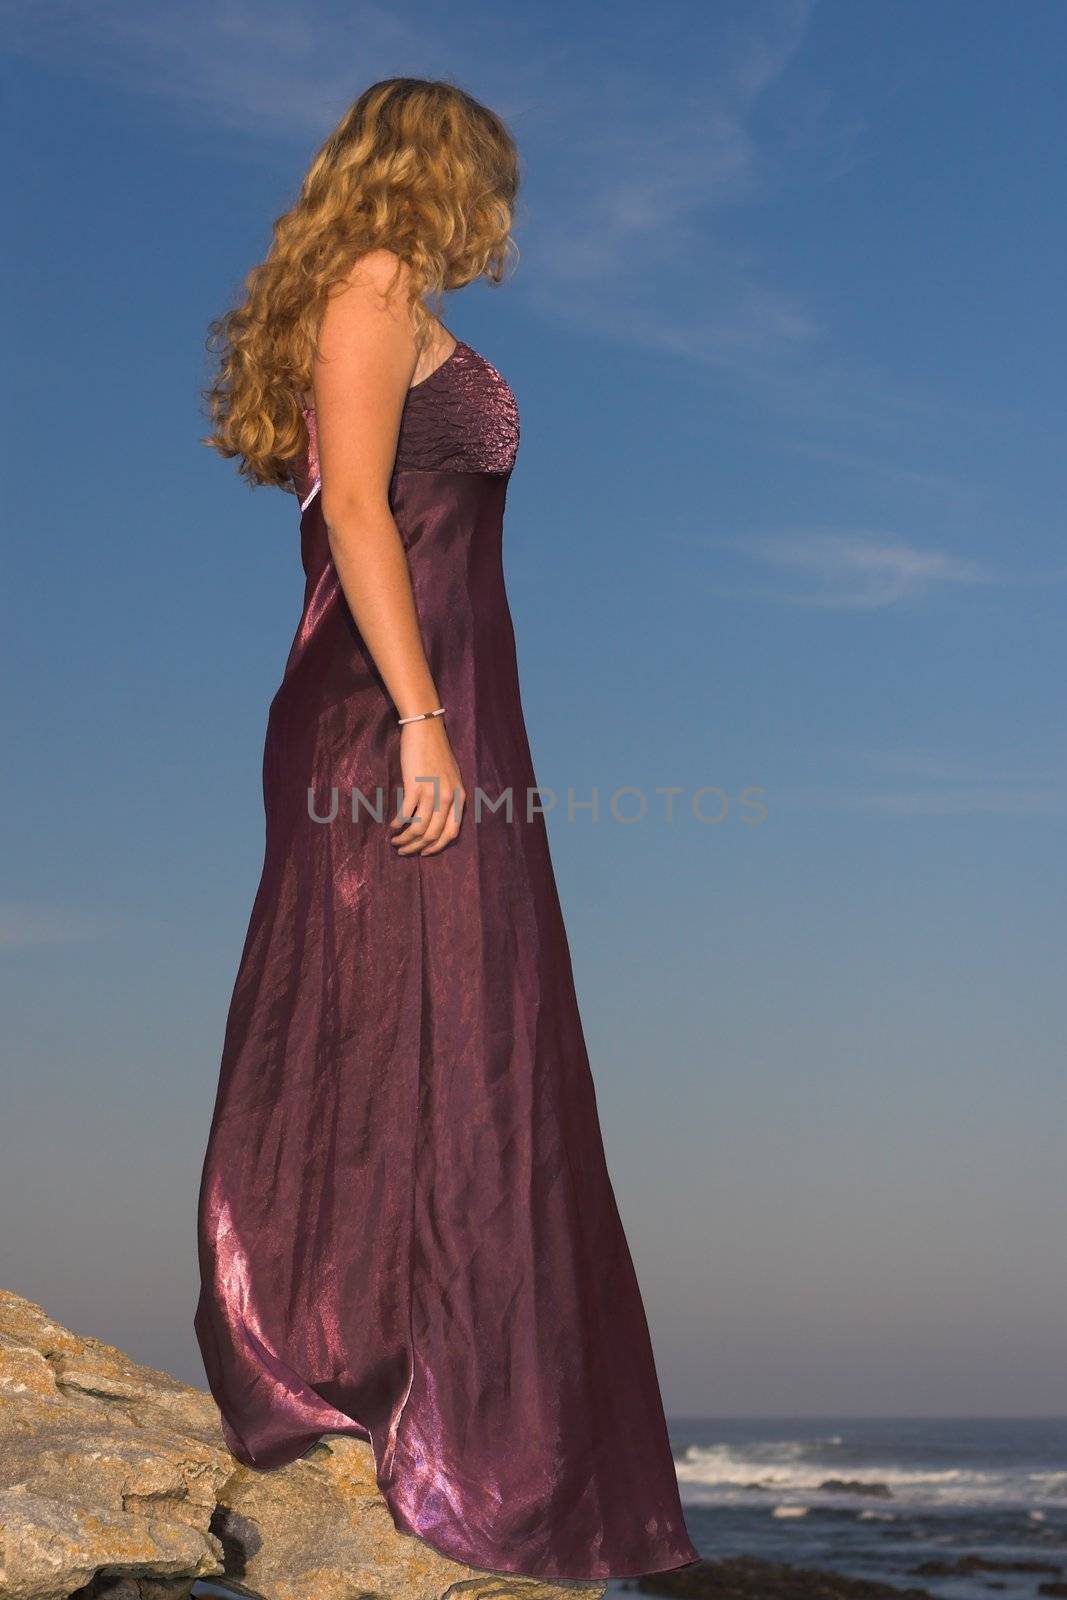 Girl in purple dress at the beach